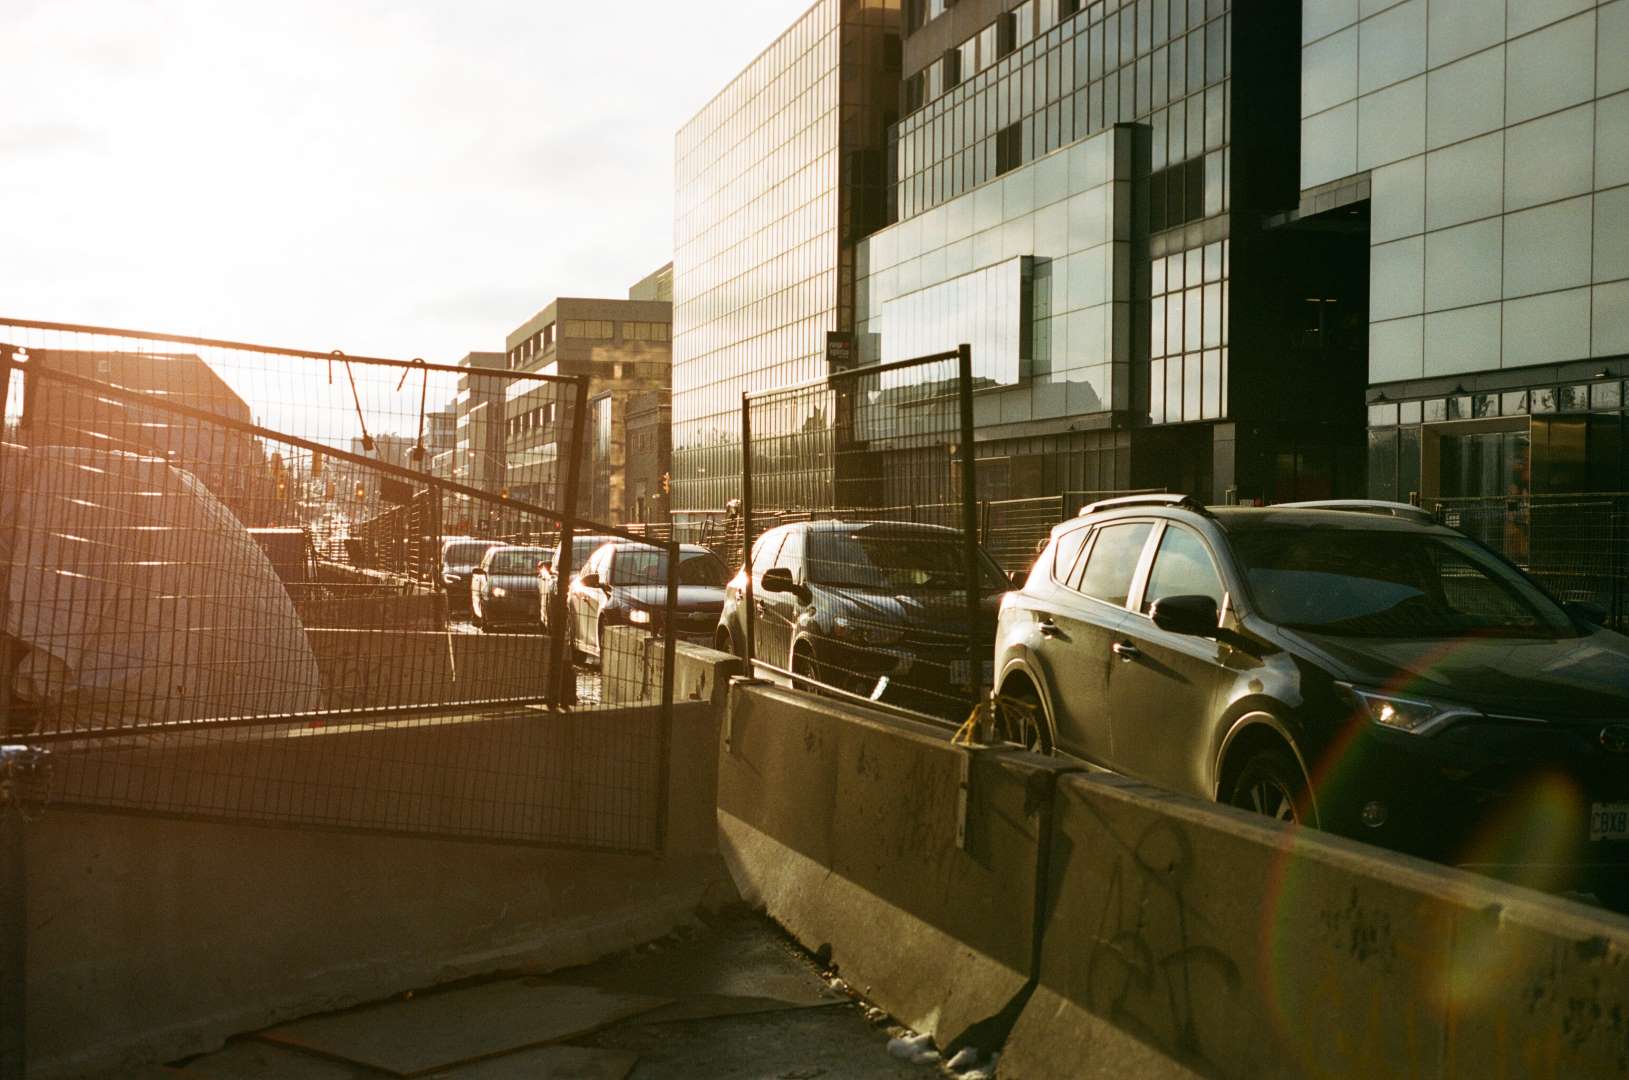 A colour photograph of cars in traffic as the sun sets, a rainbow flair is promenently visible